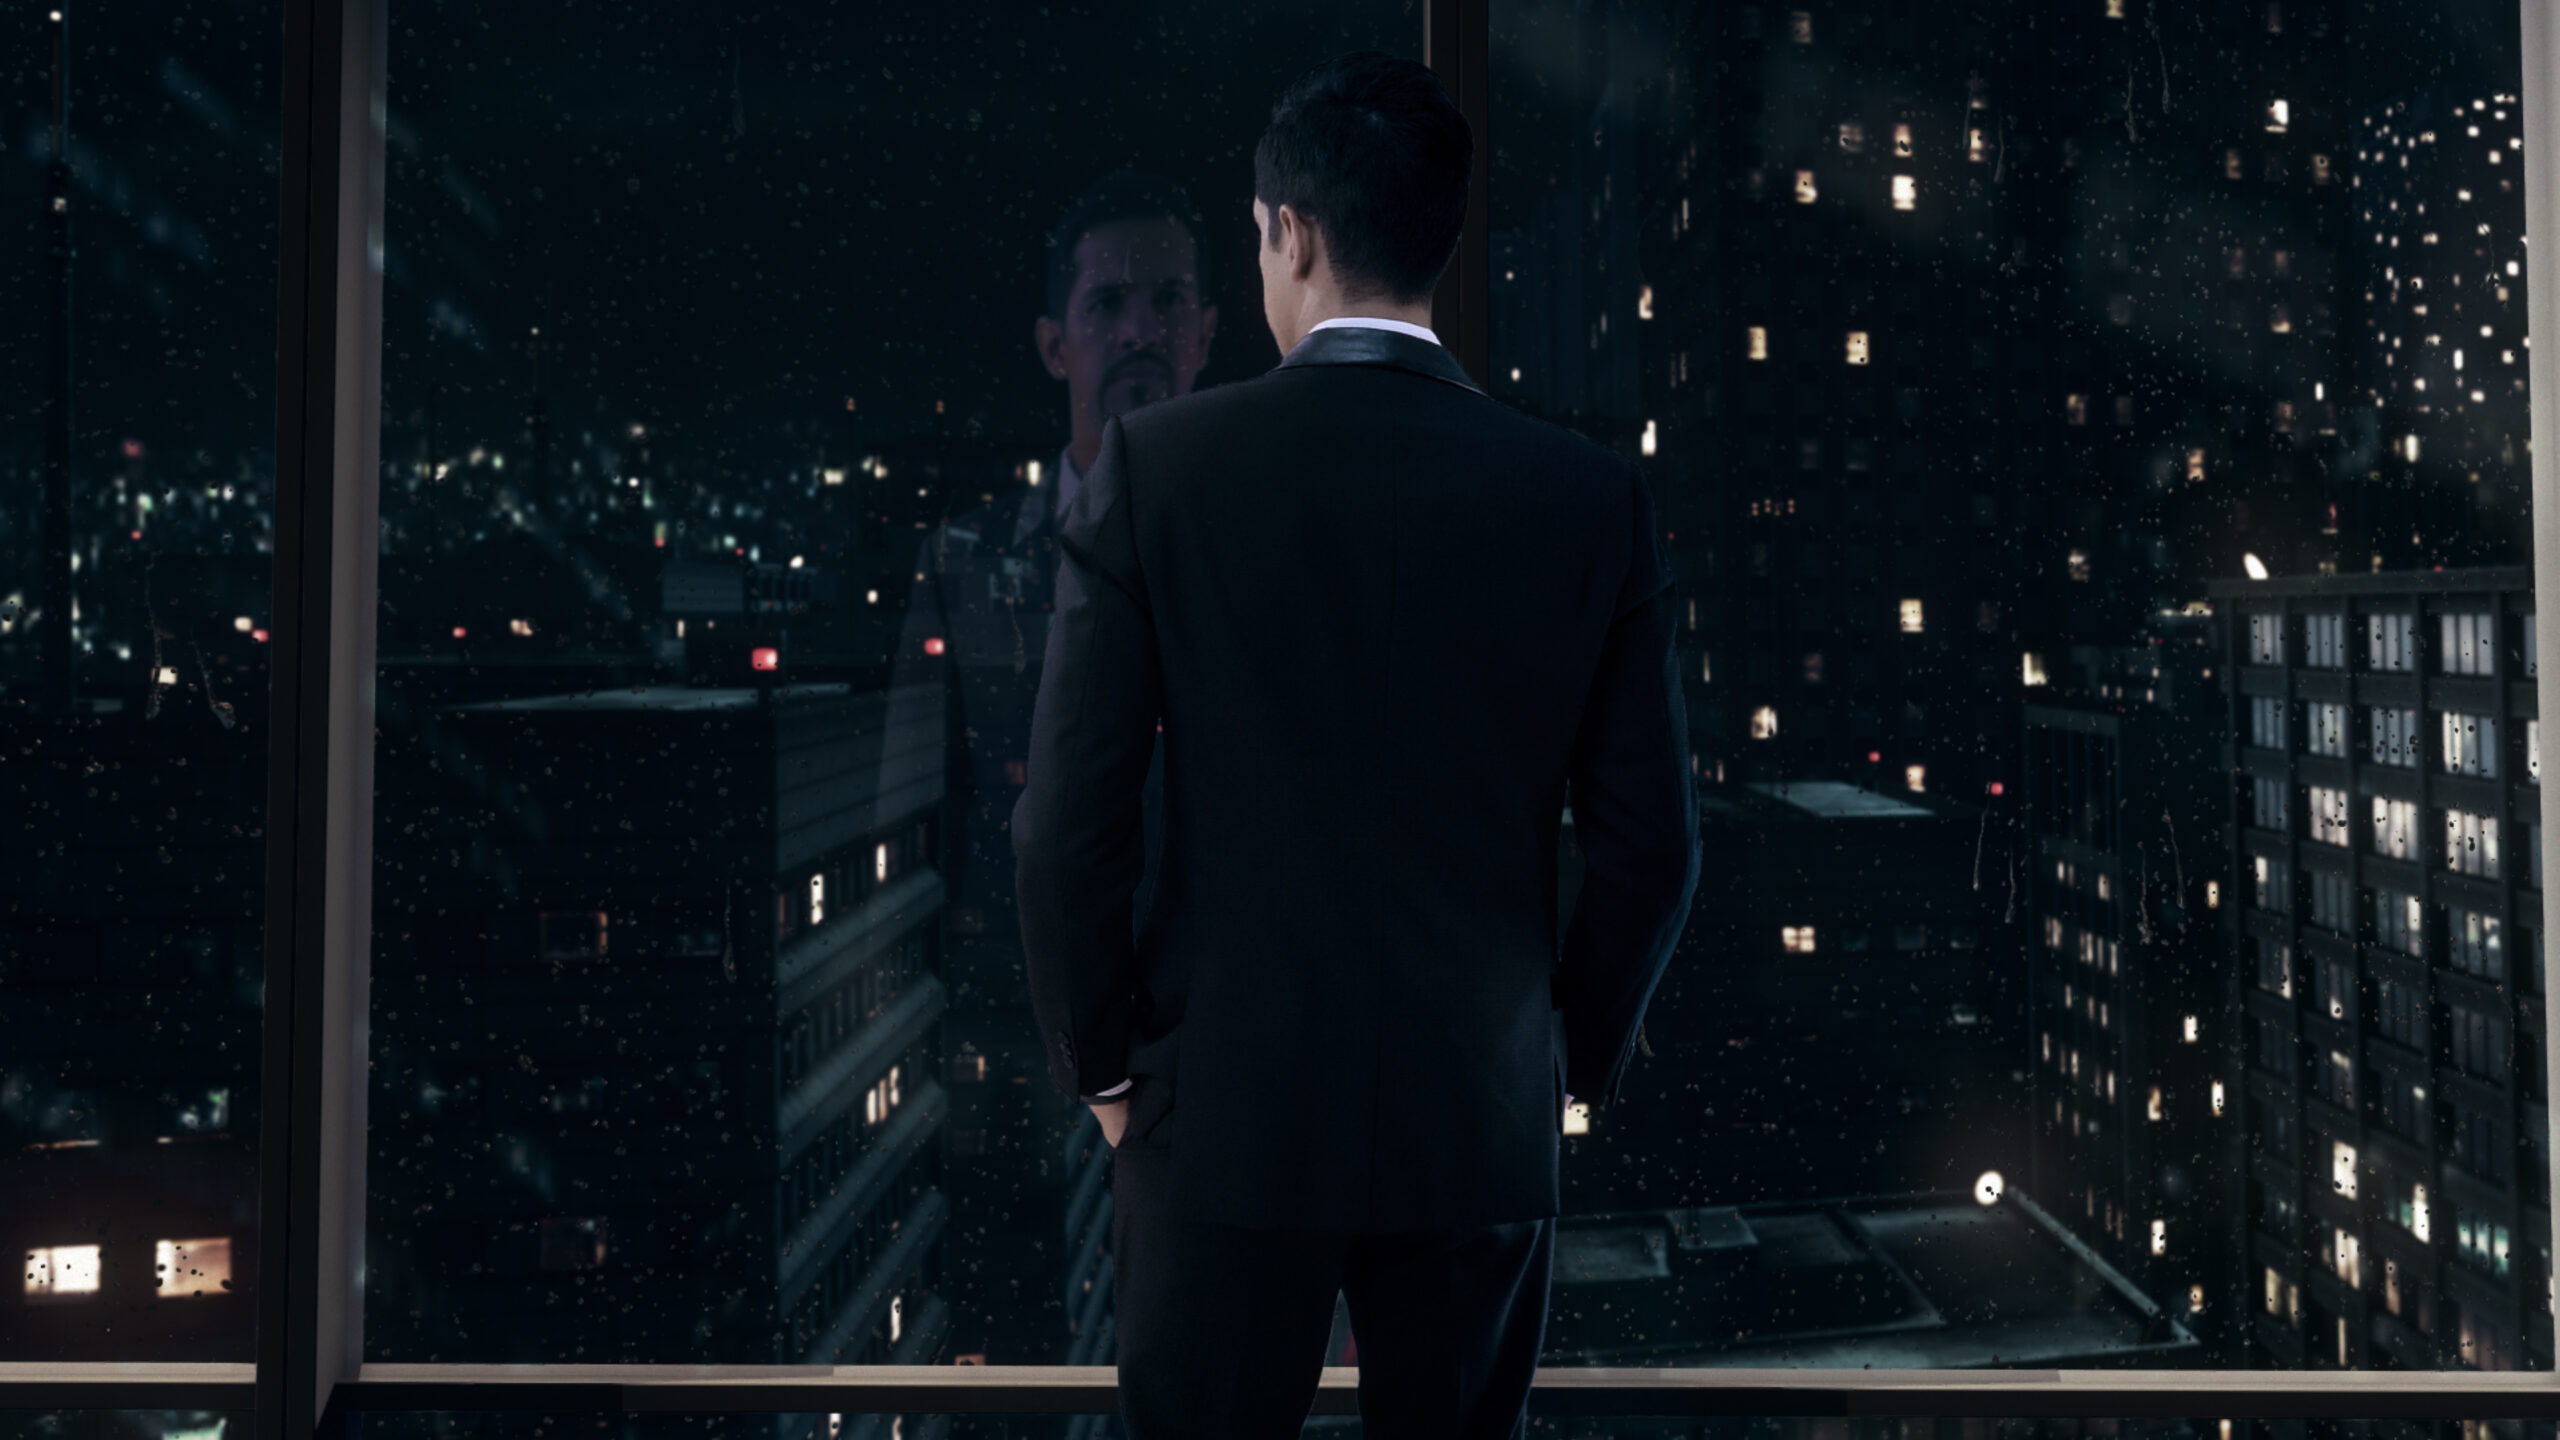 Man in black suit standing by the window to look out into the dark city